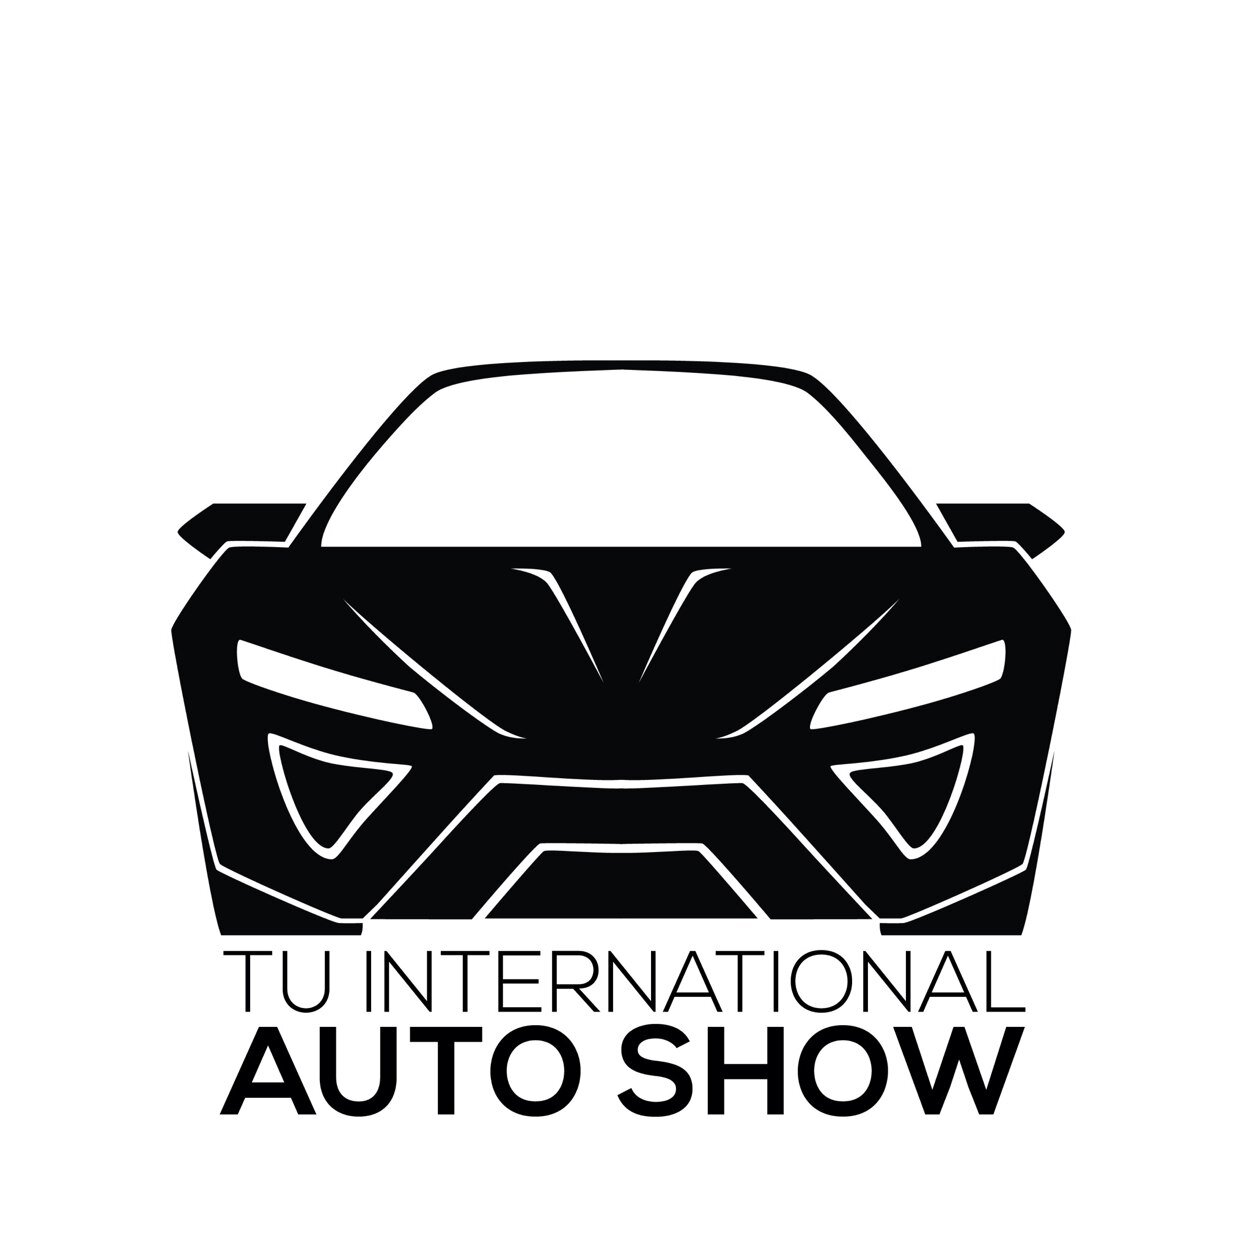 Towson University's first International Auto Show held on Saturday, May 10, 2014 from 1:00 PM to 5:00 PM (EDT) by the OCSS. Join us for cars, food and fun.